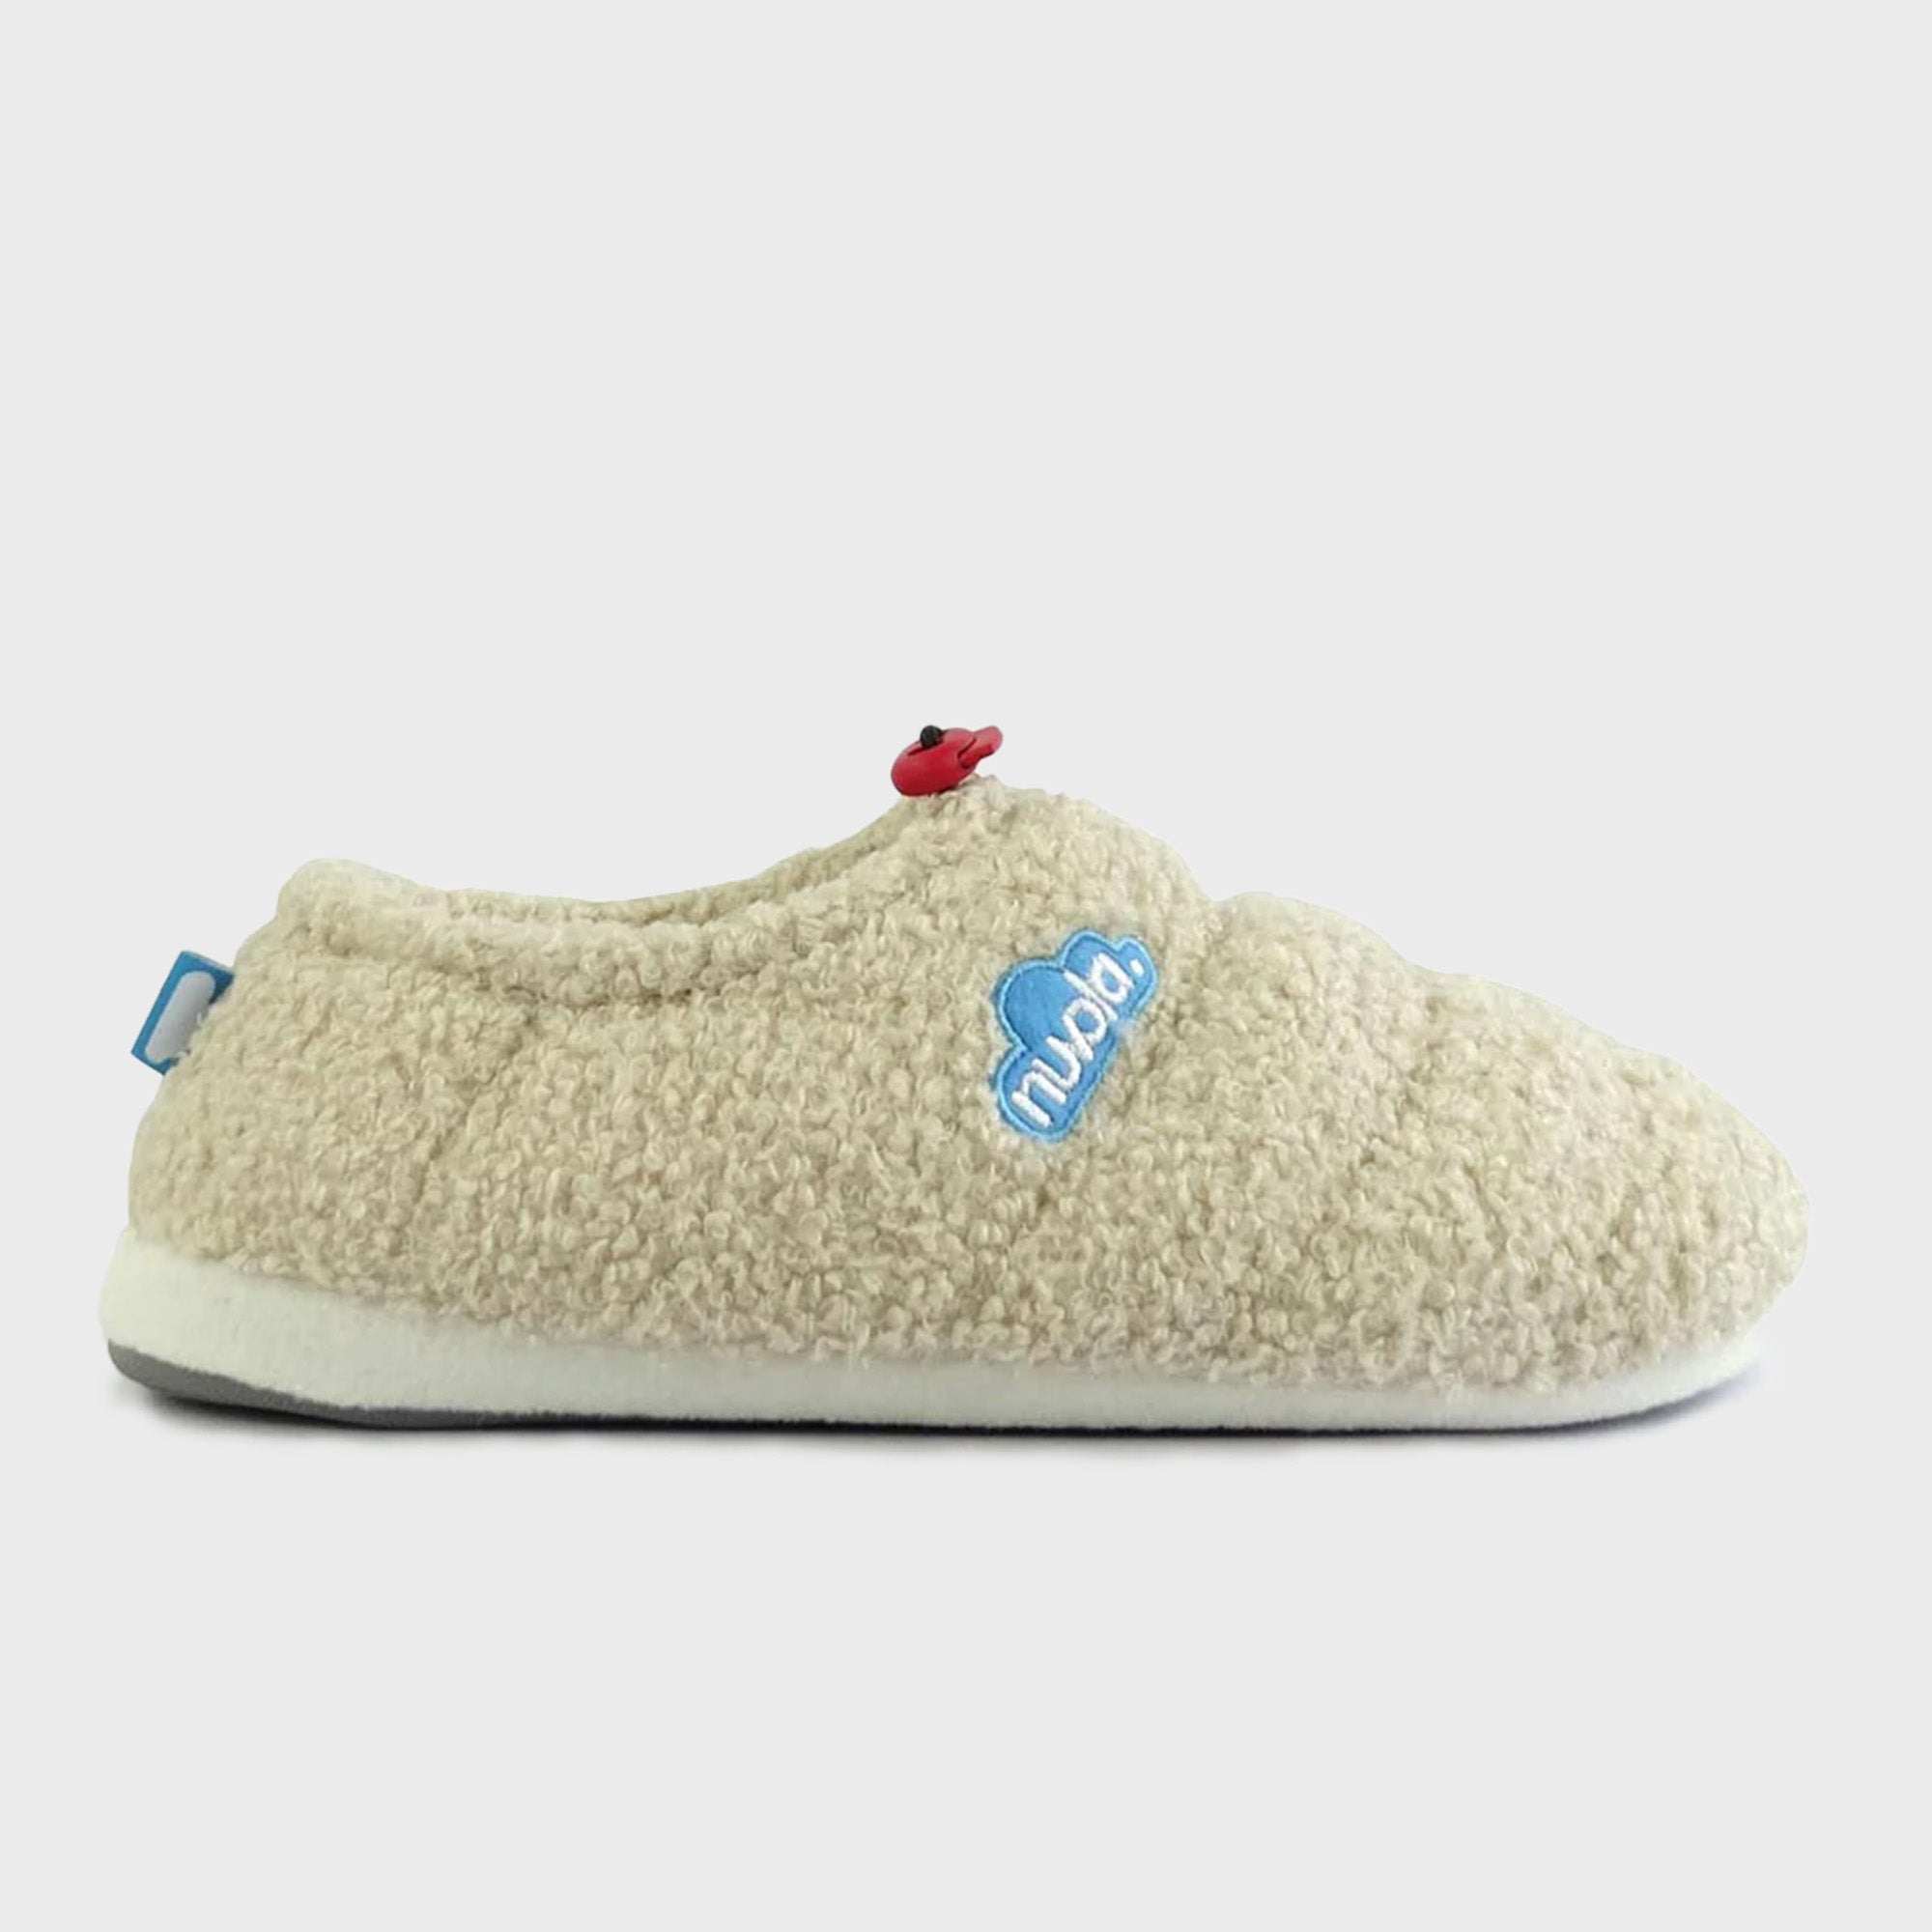 Nuvola Classic Sheep Slippers in Cream CNCLSHEP697 FROM EIGHTYWINGOLD - OFFICIAL BRAND PARTNER